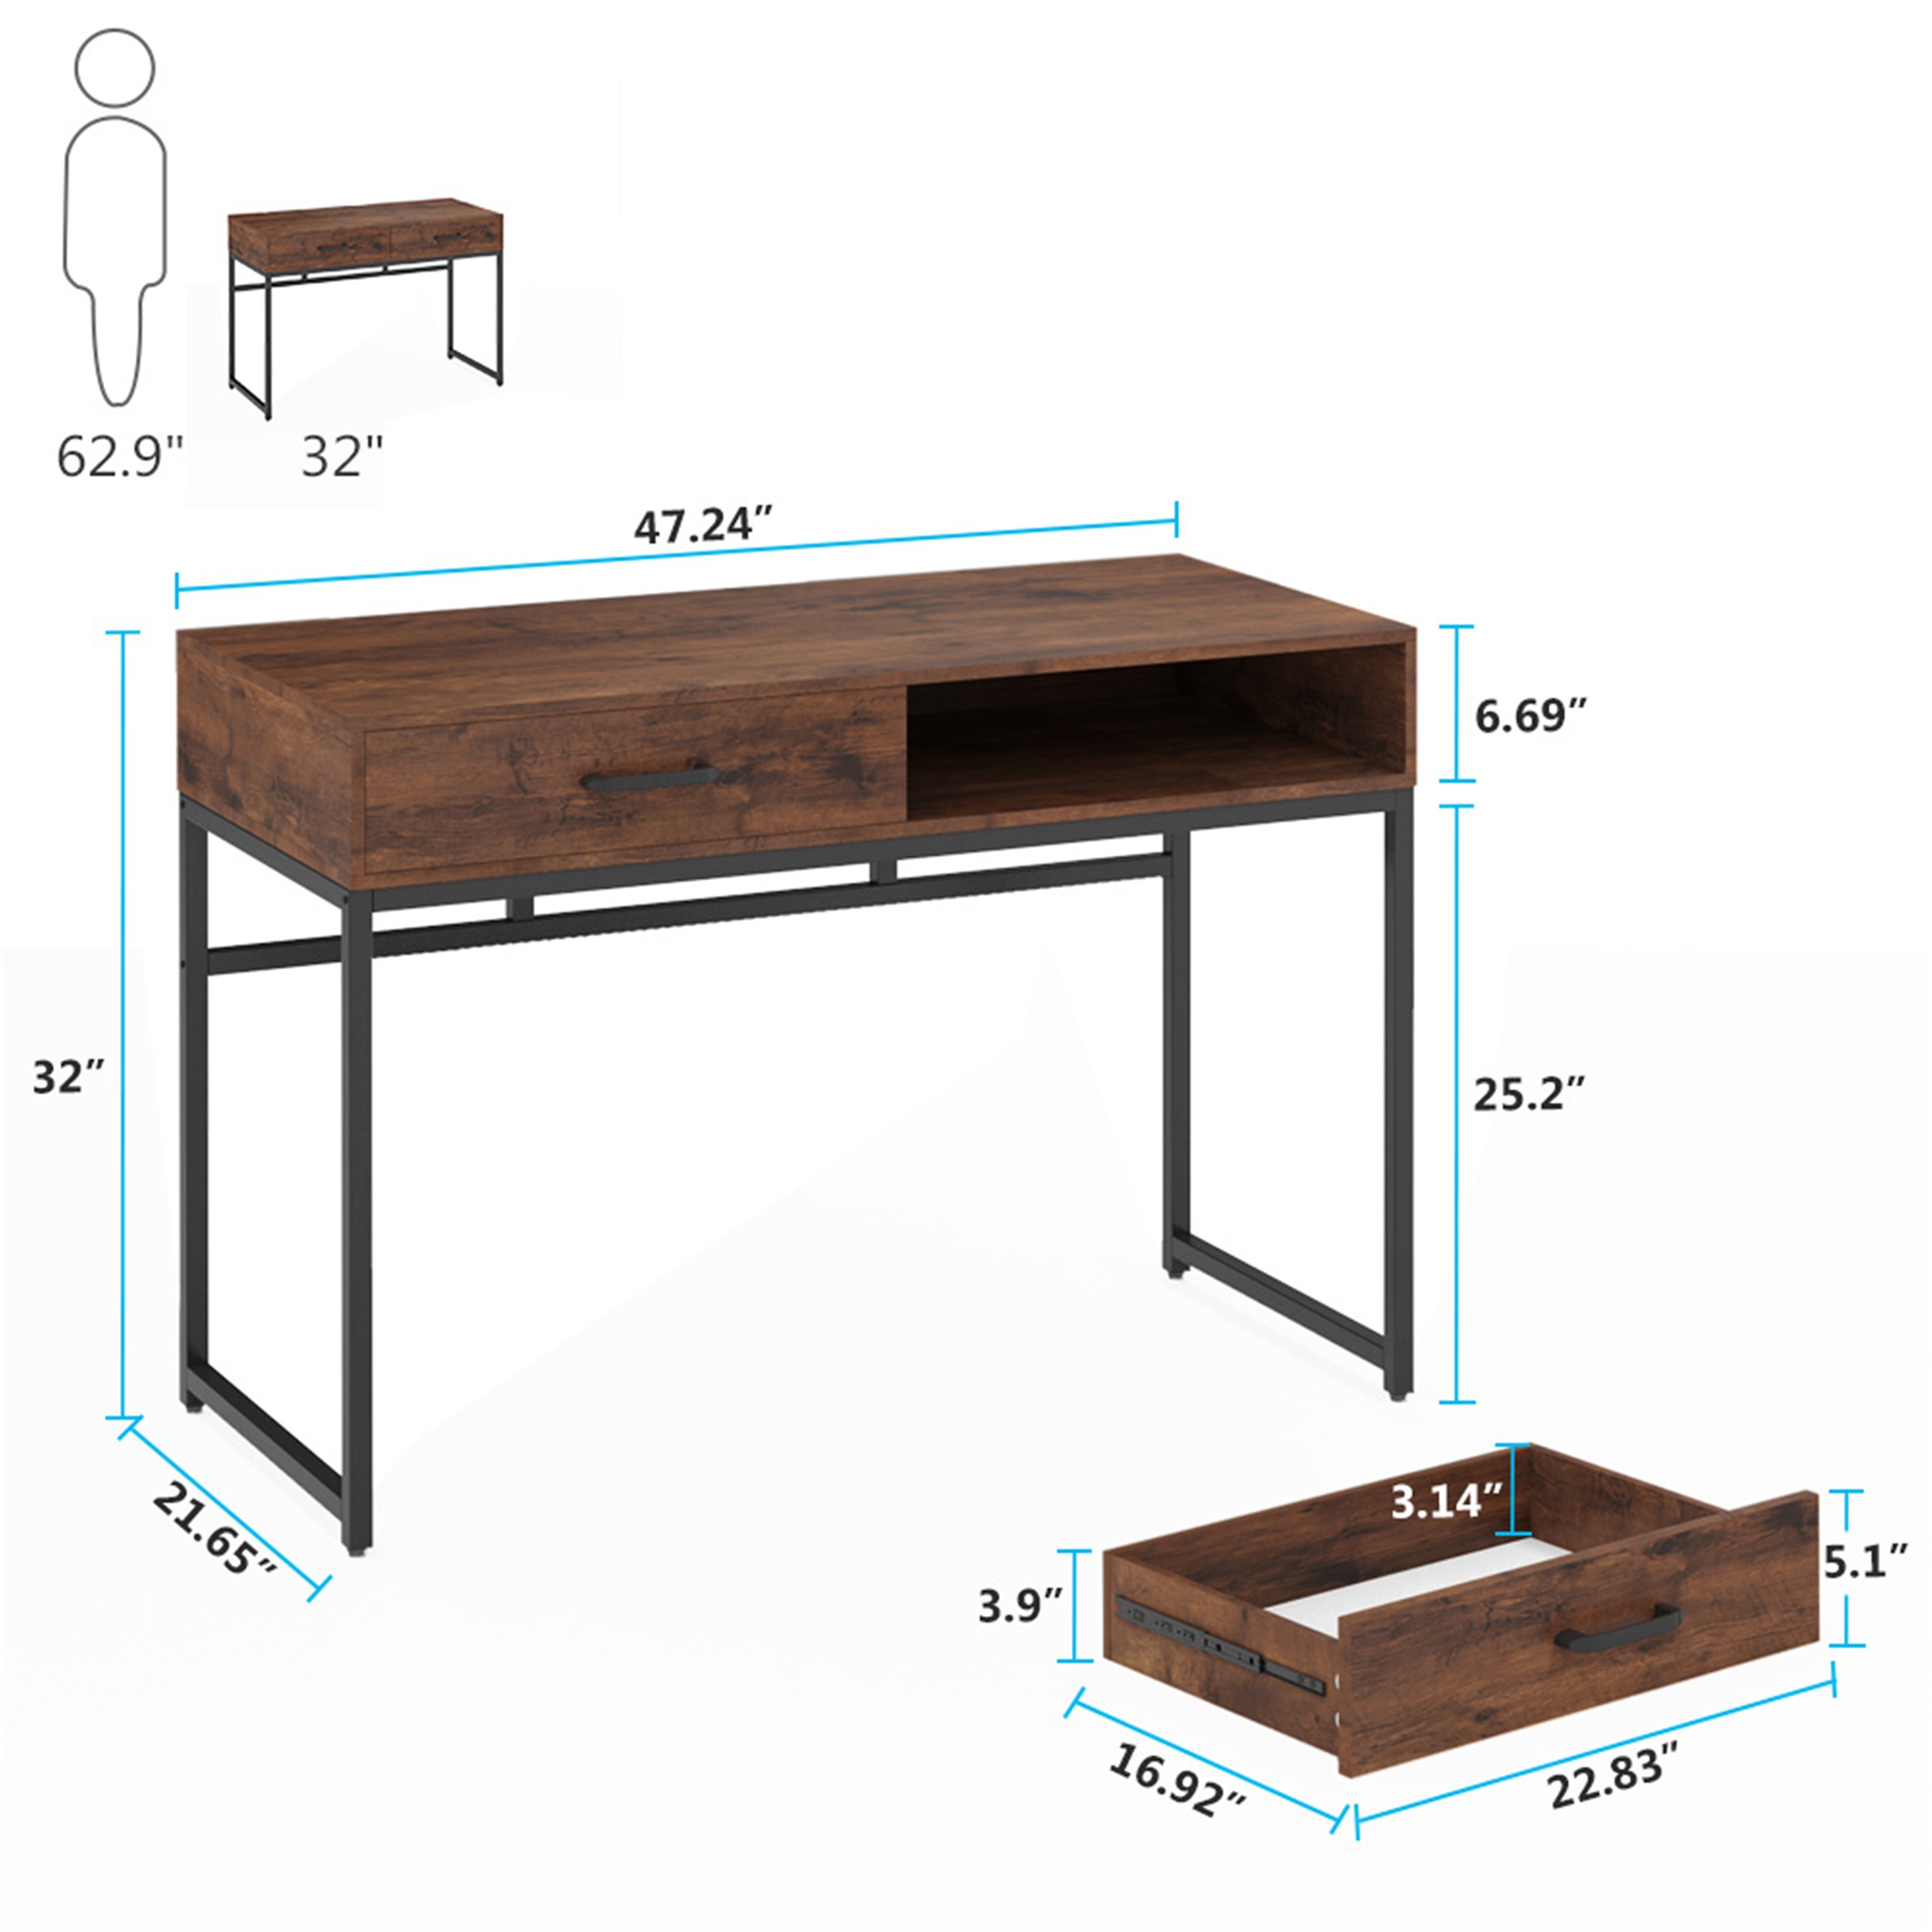 47 Modern Simple Computer Desk with Drawers - On Sale - Bed Bath & Beyond  - 33277964